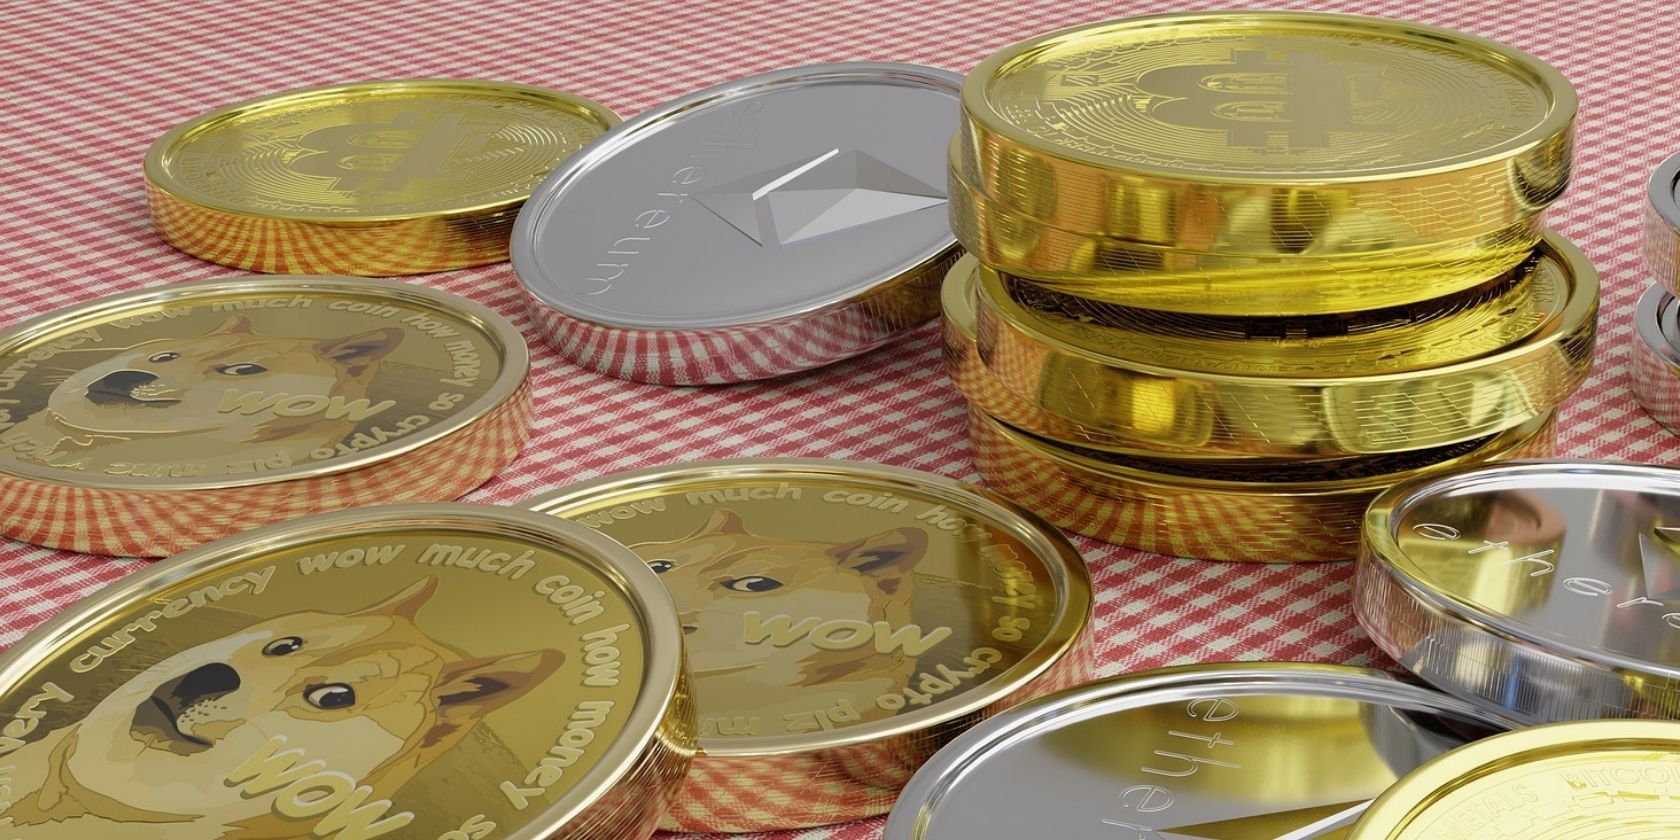 bitcoin dogecoin and ethereum coins on table